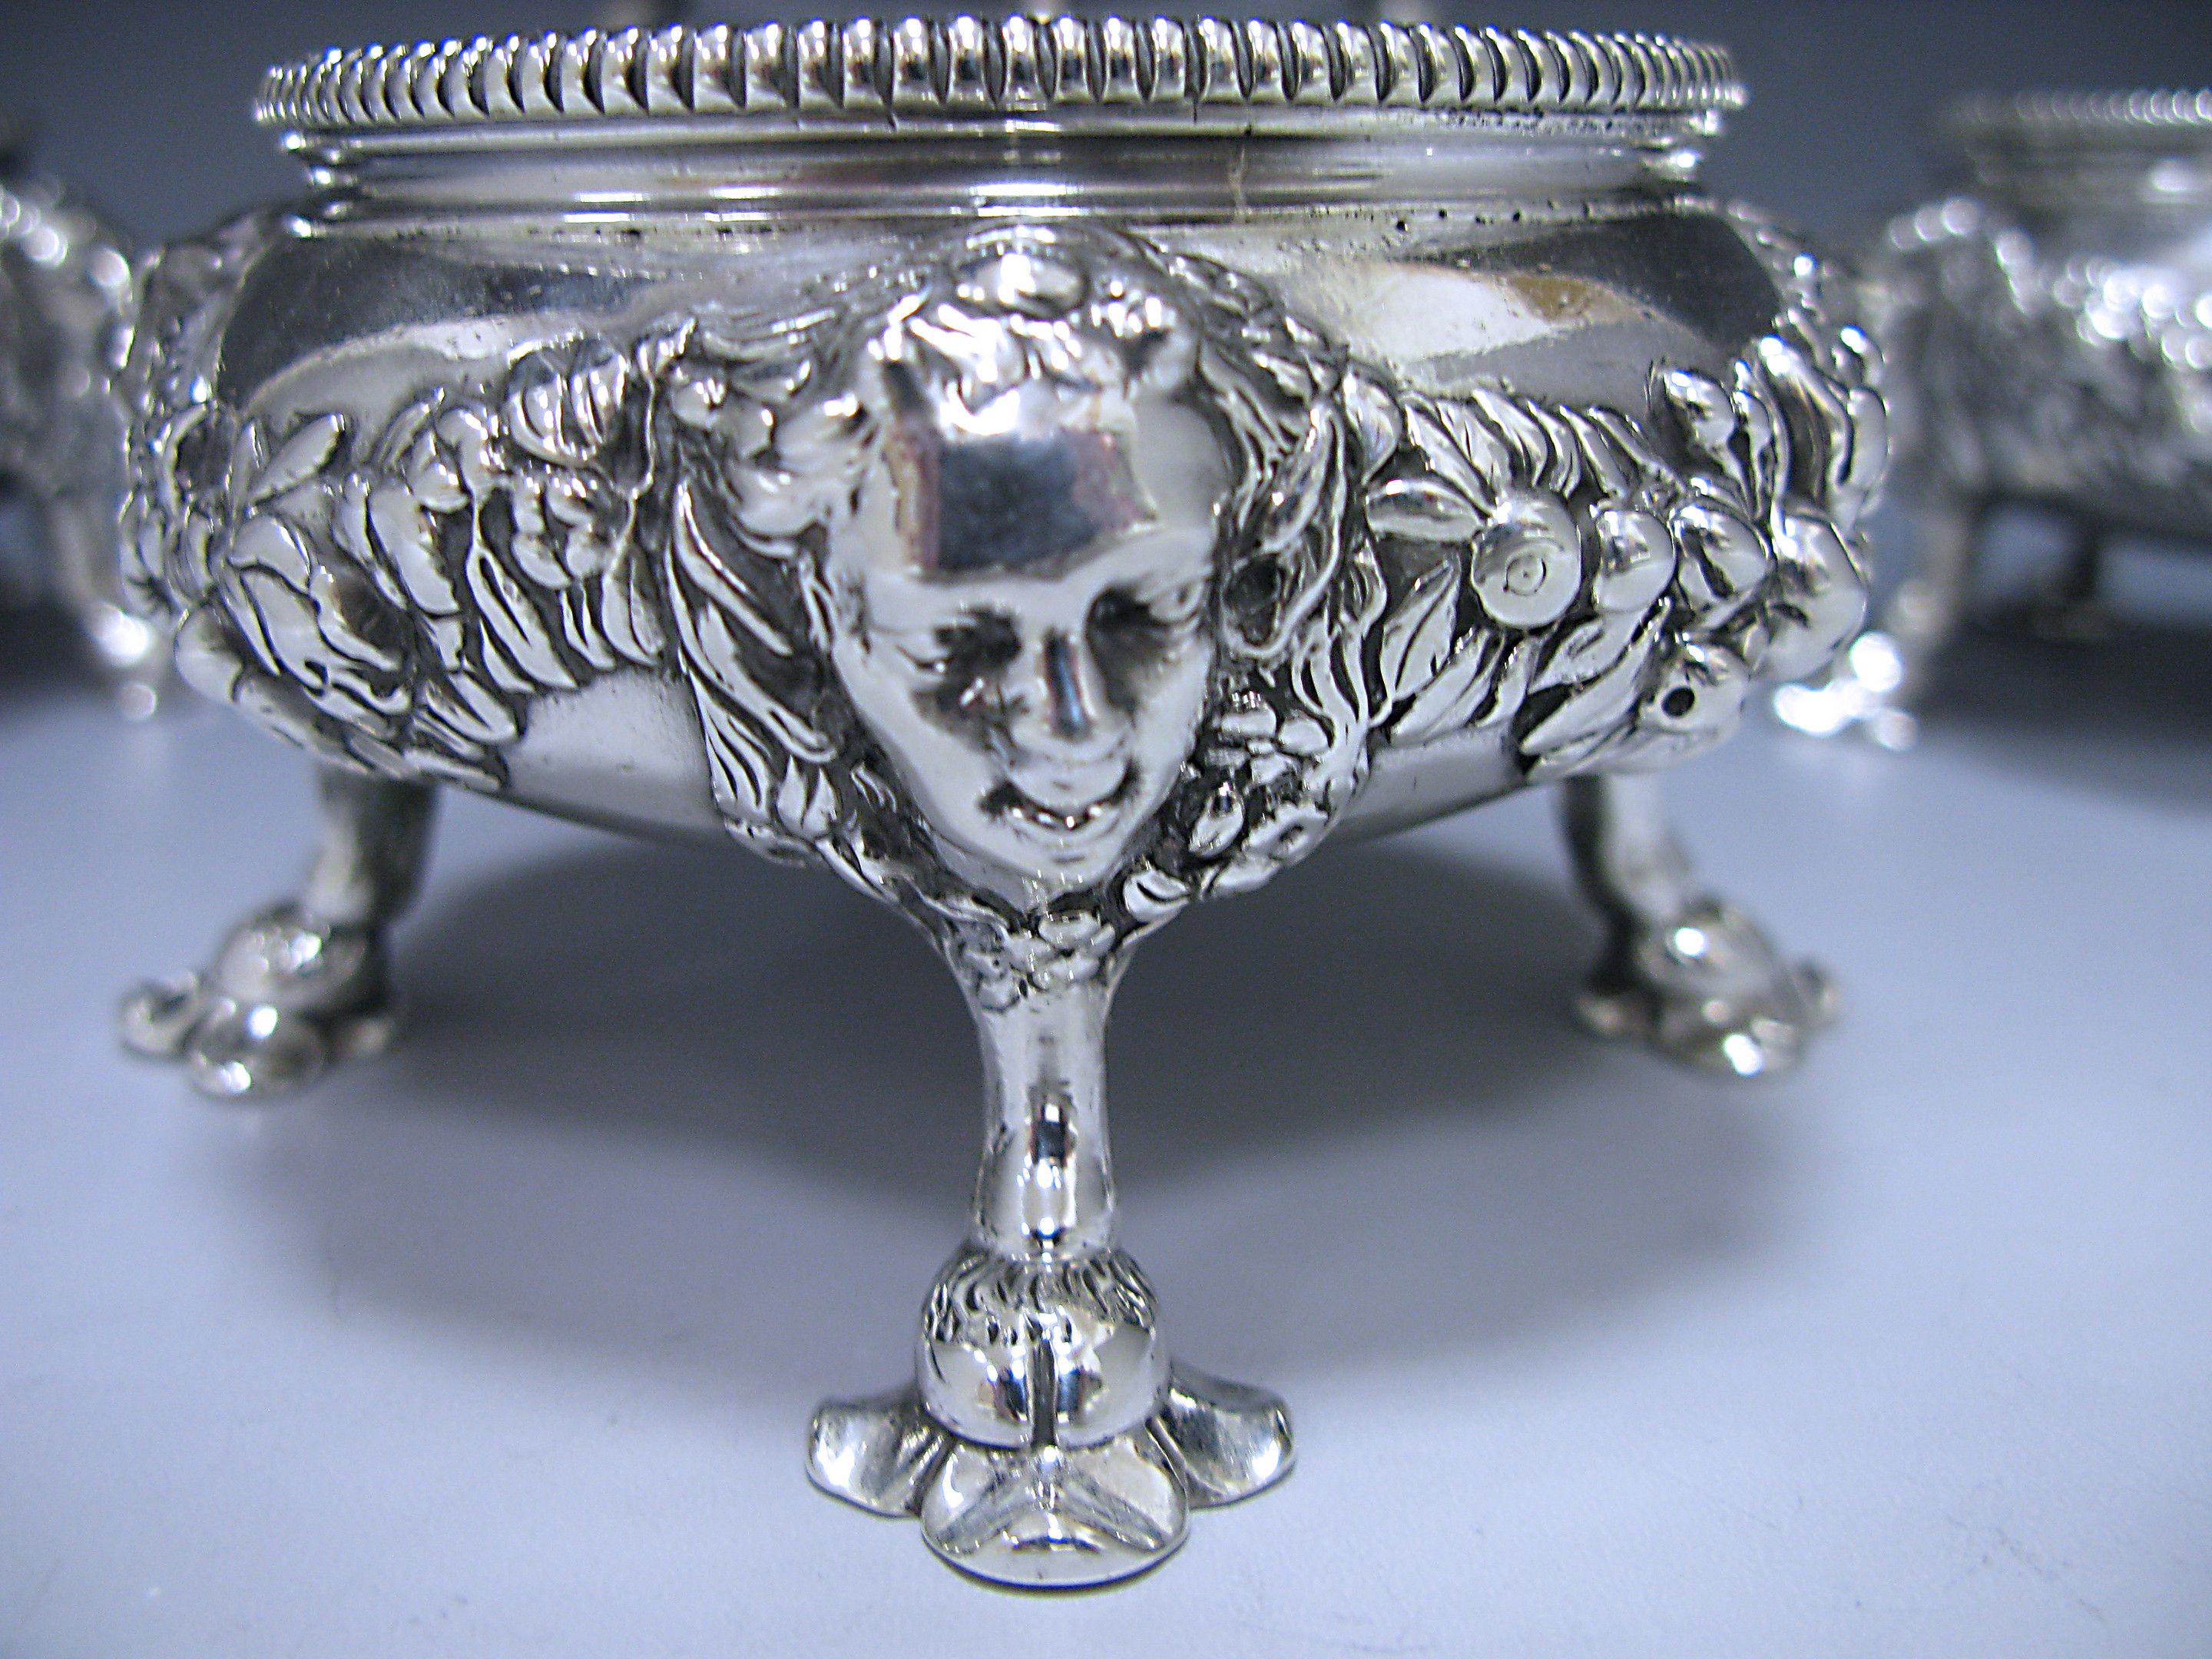 Four magnificent George II antique silver salts, one pair 1750 made by Peter Taylor of London and one pair 1769 by Parker & Wakelin of London. The firm of Parker and Wakelin was the foremost silversmith in London for much of the eighteenth century,